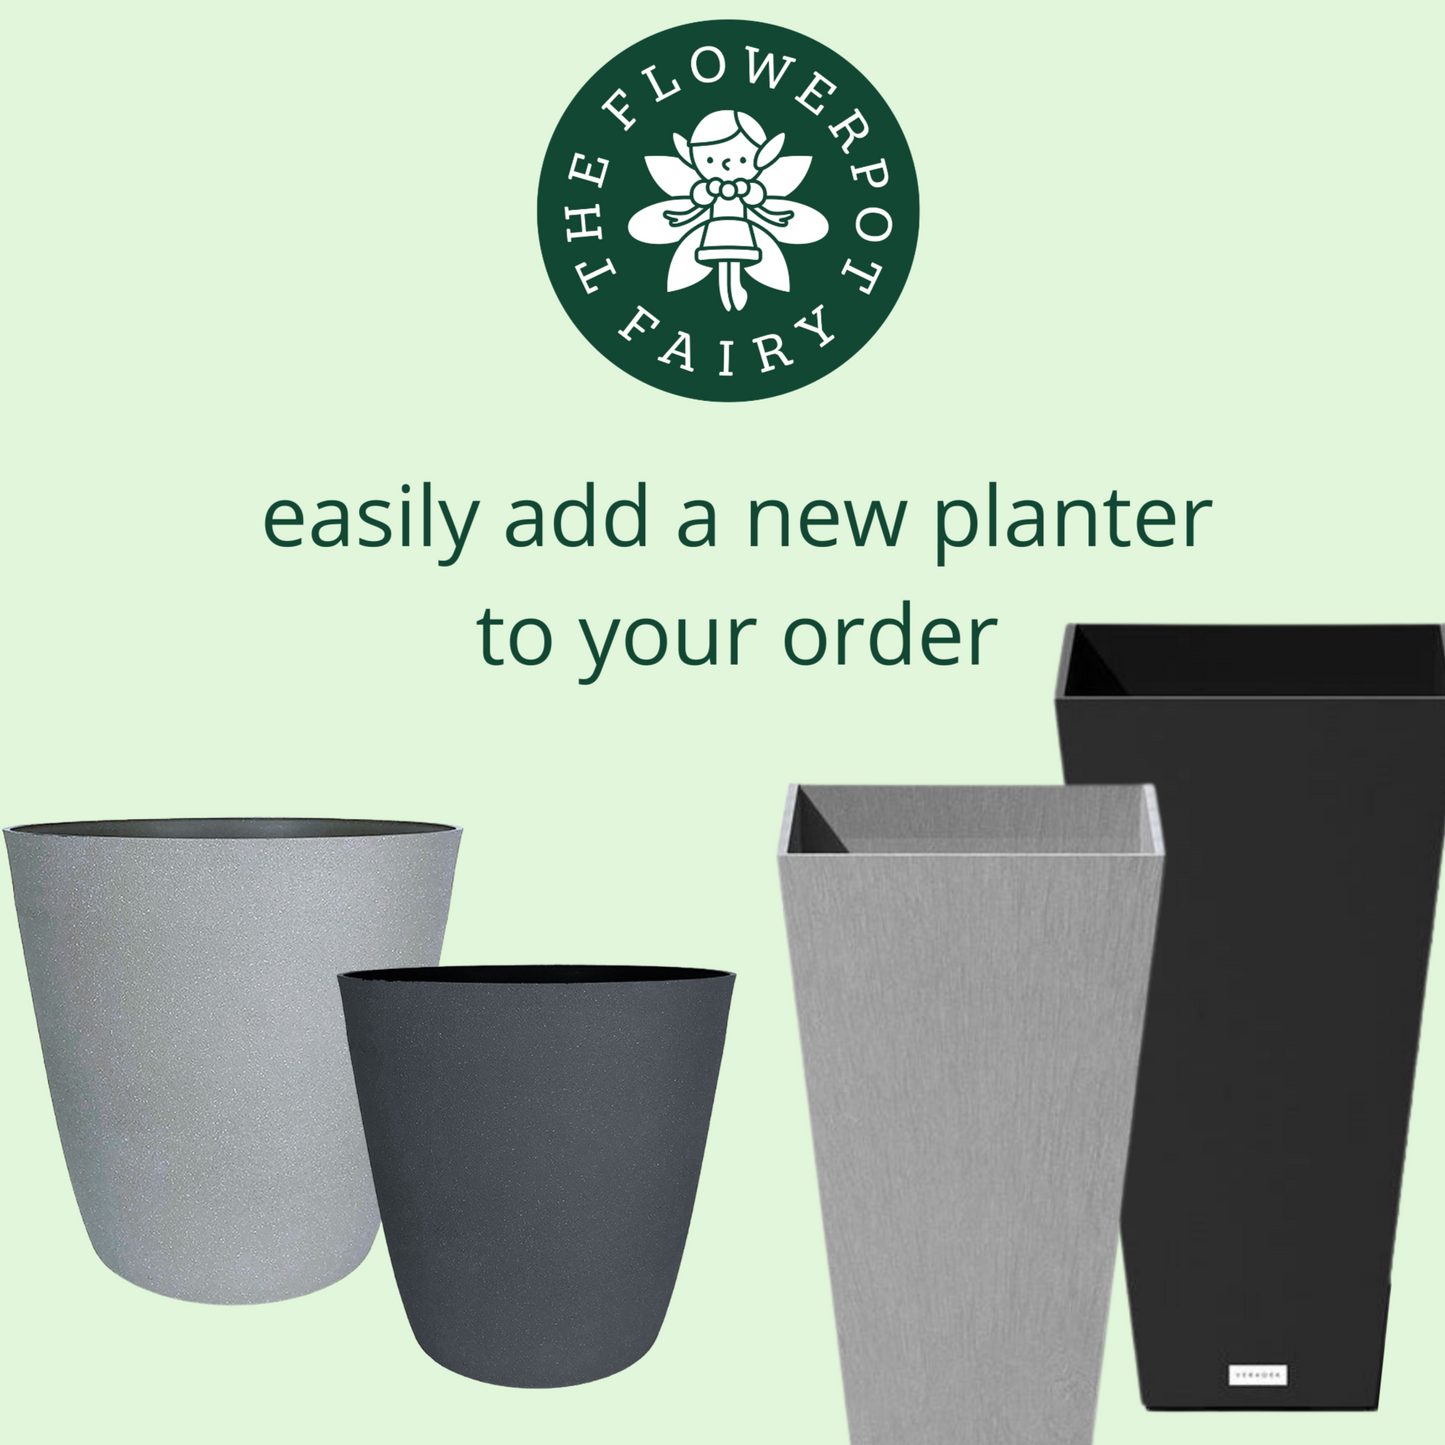 5 planters for The Flowerpot Fairy Container Gardens in Oklahoma City. Multiple colors available. 2 gray, 1 white, 2 back.